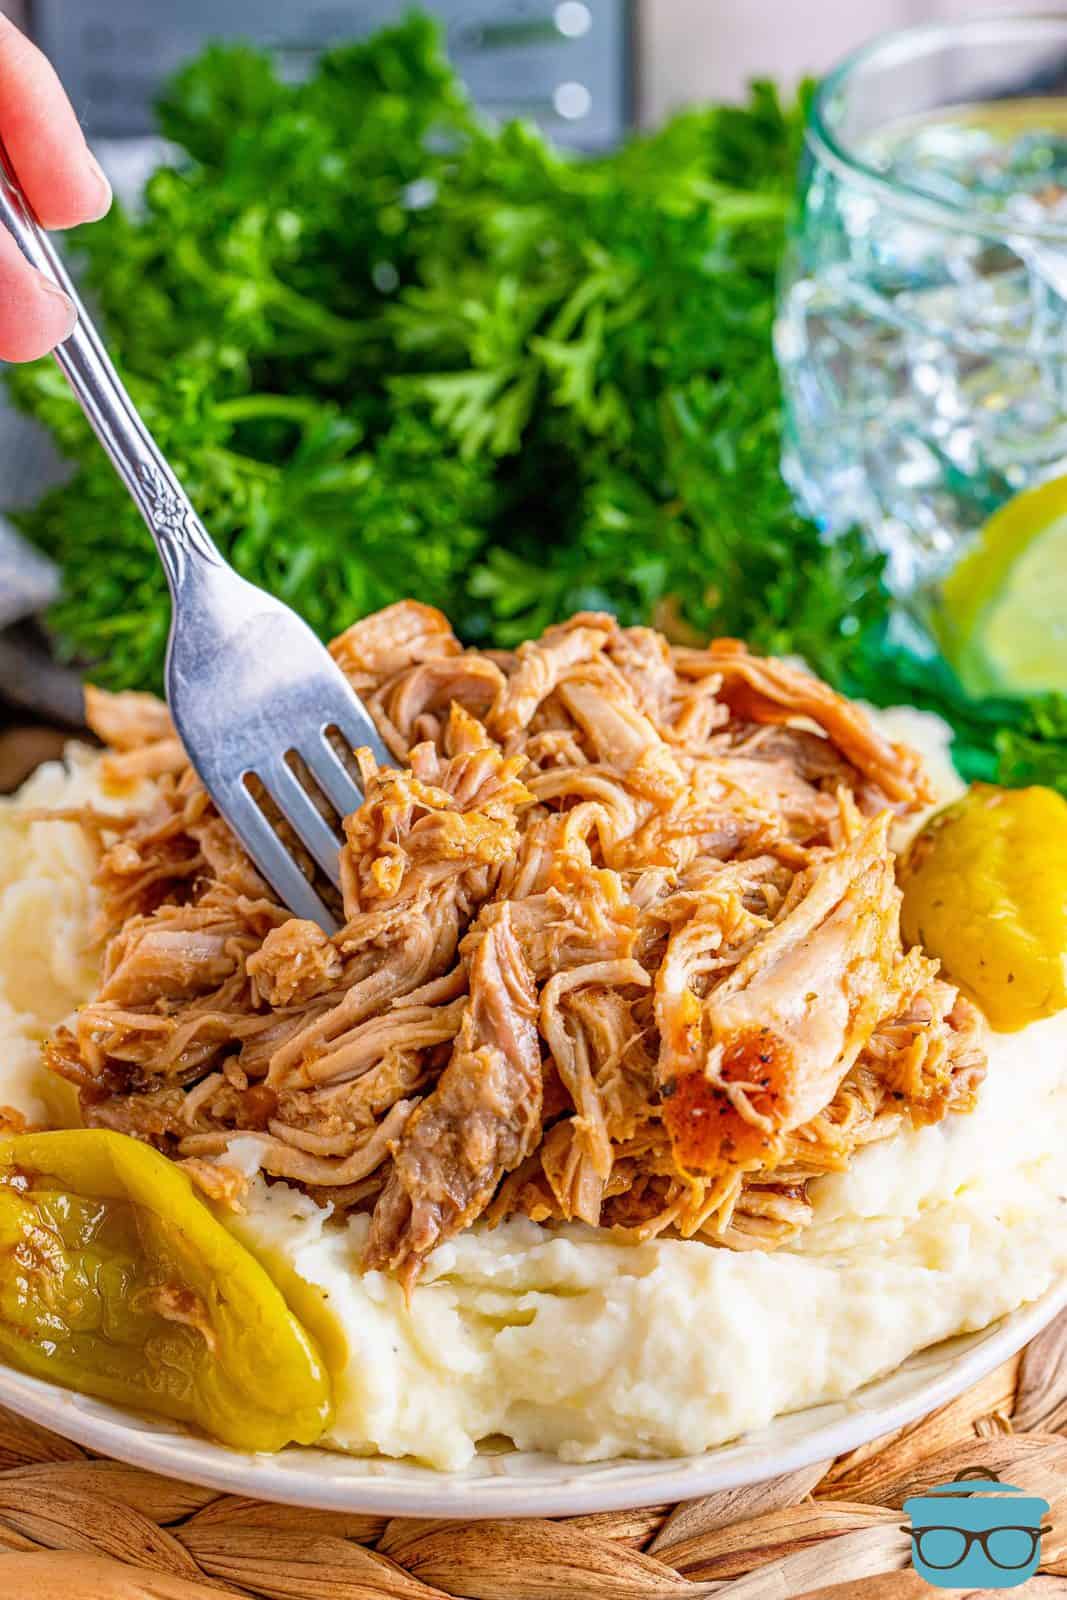 A fork shown inside shredded pork that is on top of mashed potatoes on a plate. 